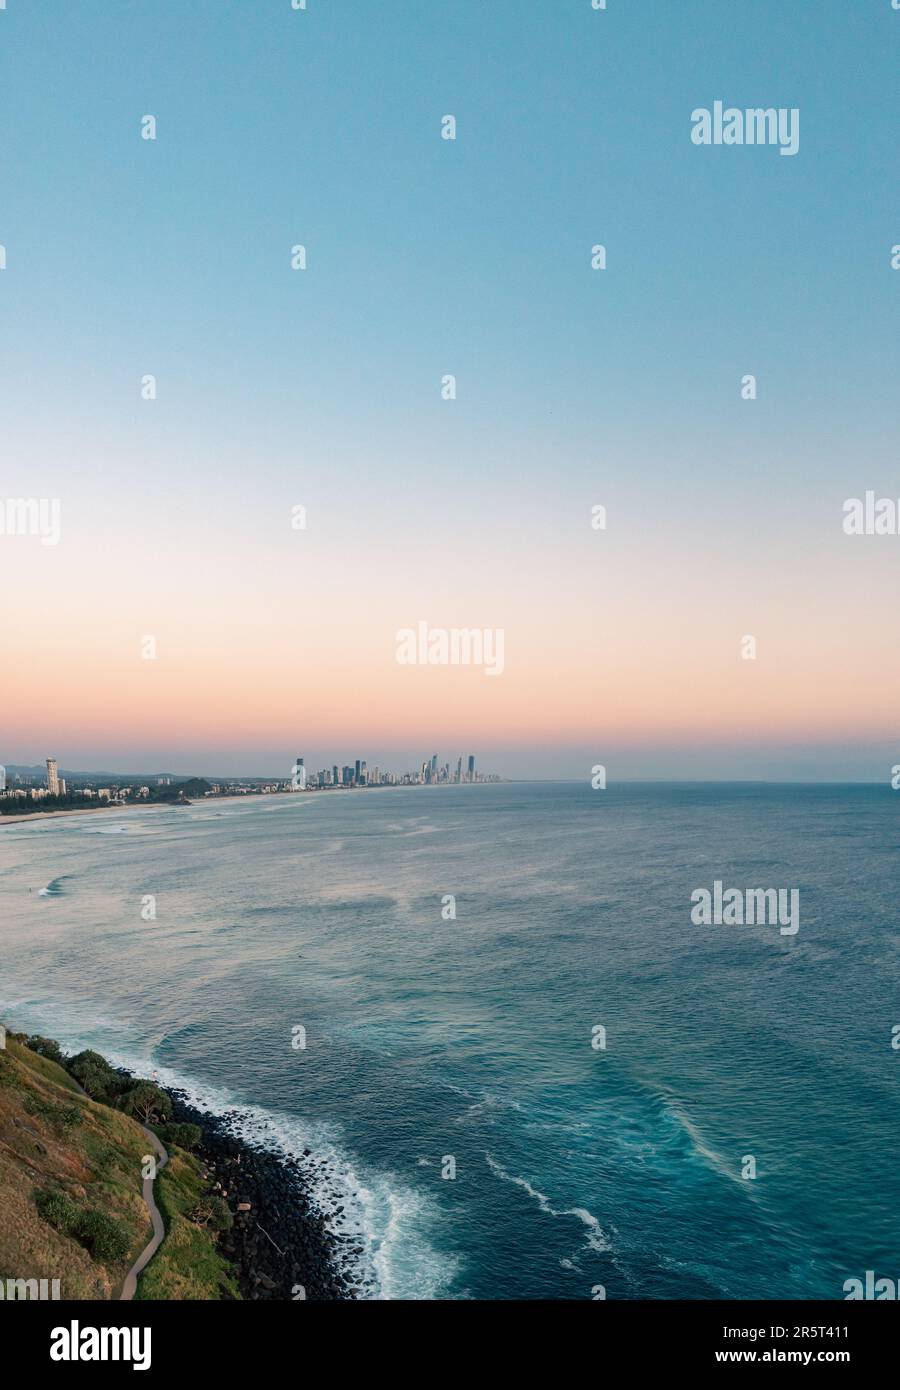 An aerial view of a bustling city skyline overlooking the coast, with lush green hills rolling down to the sparkling blue ocean Stock Photo